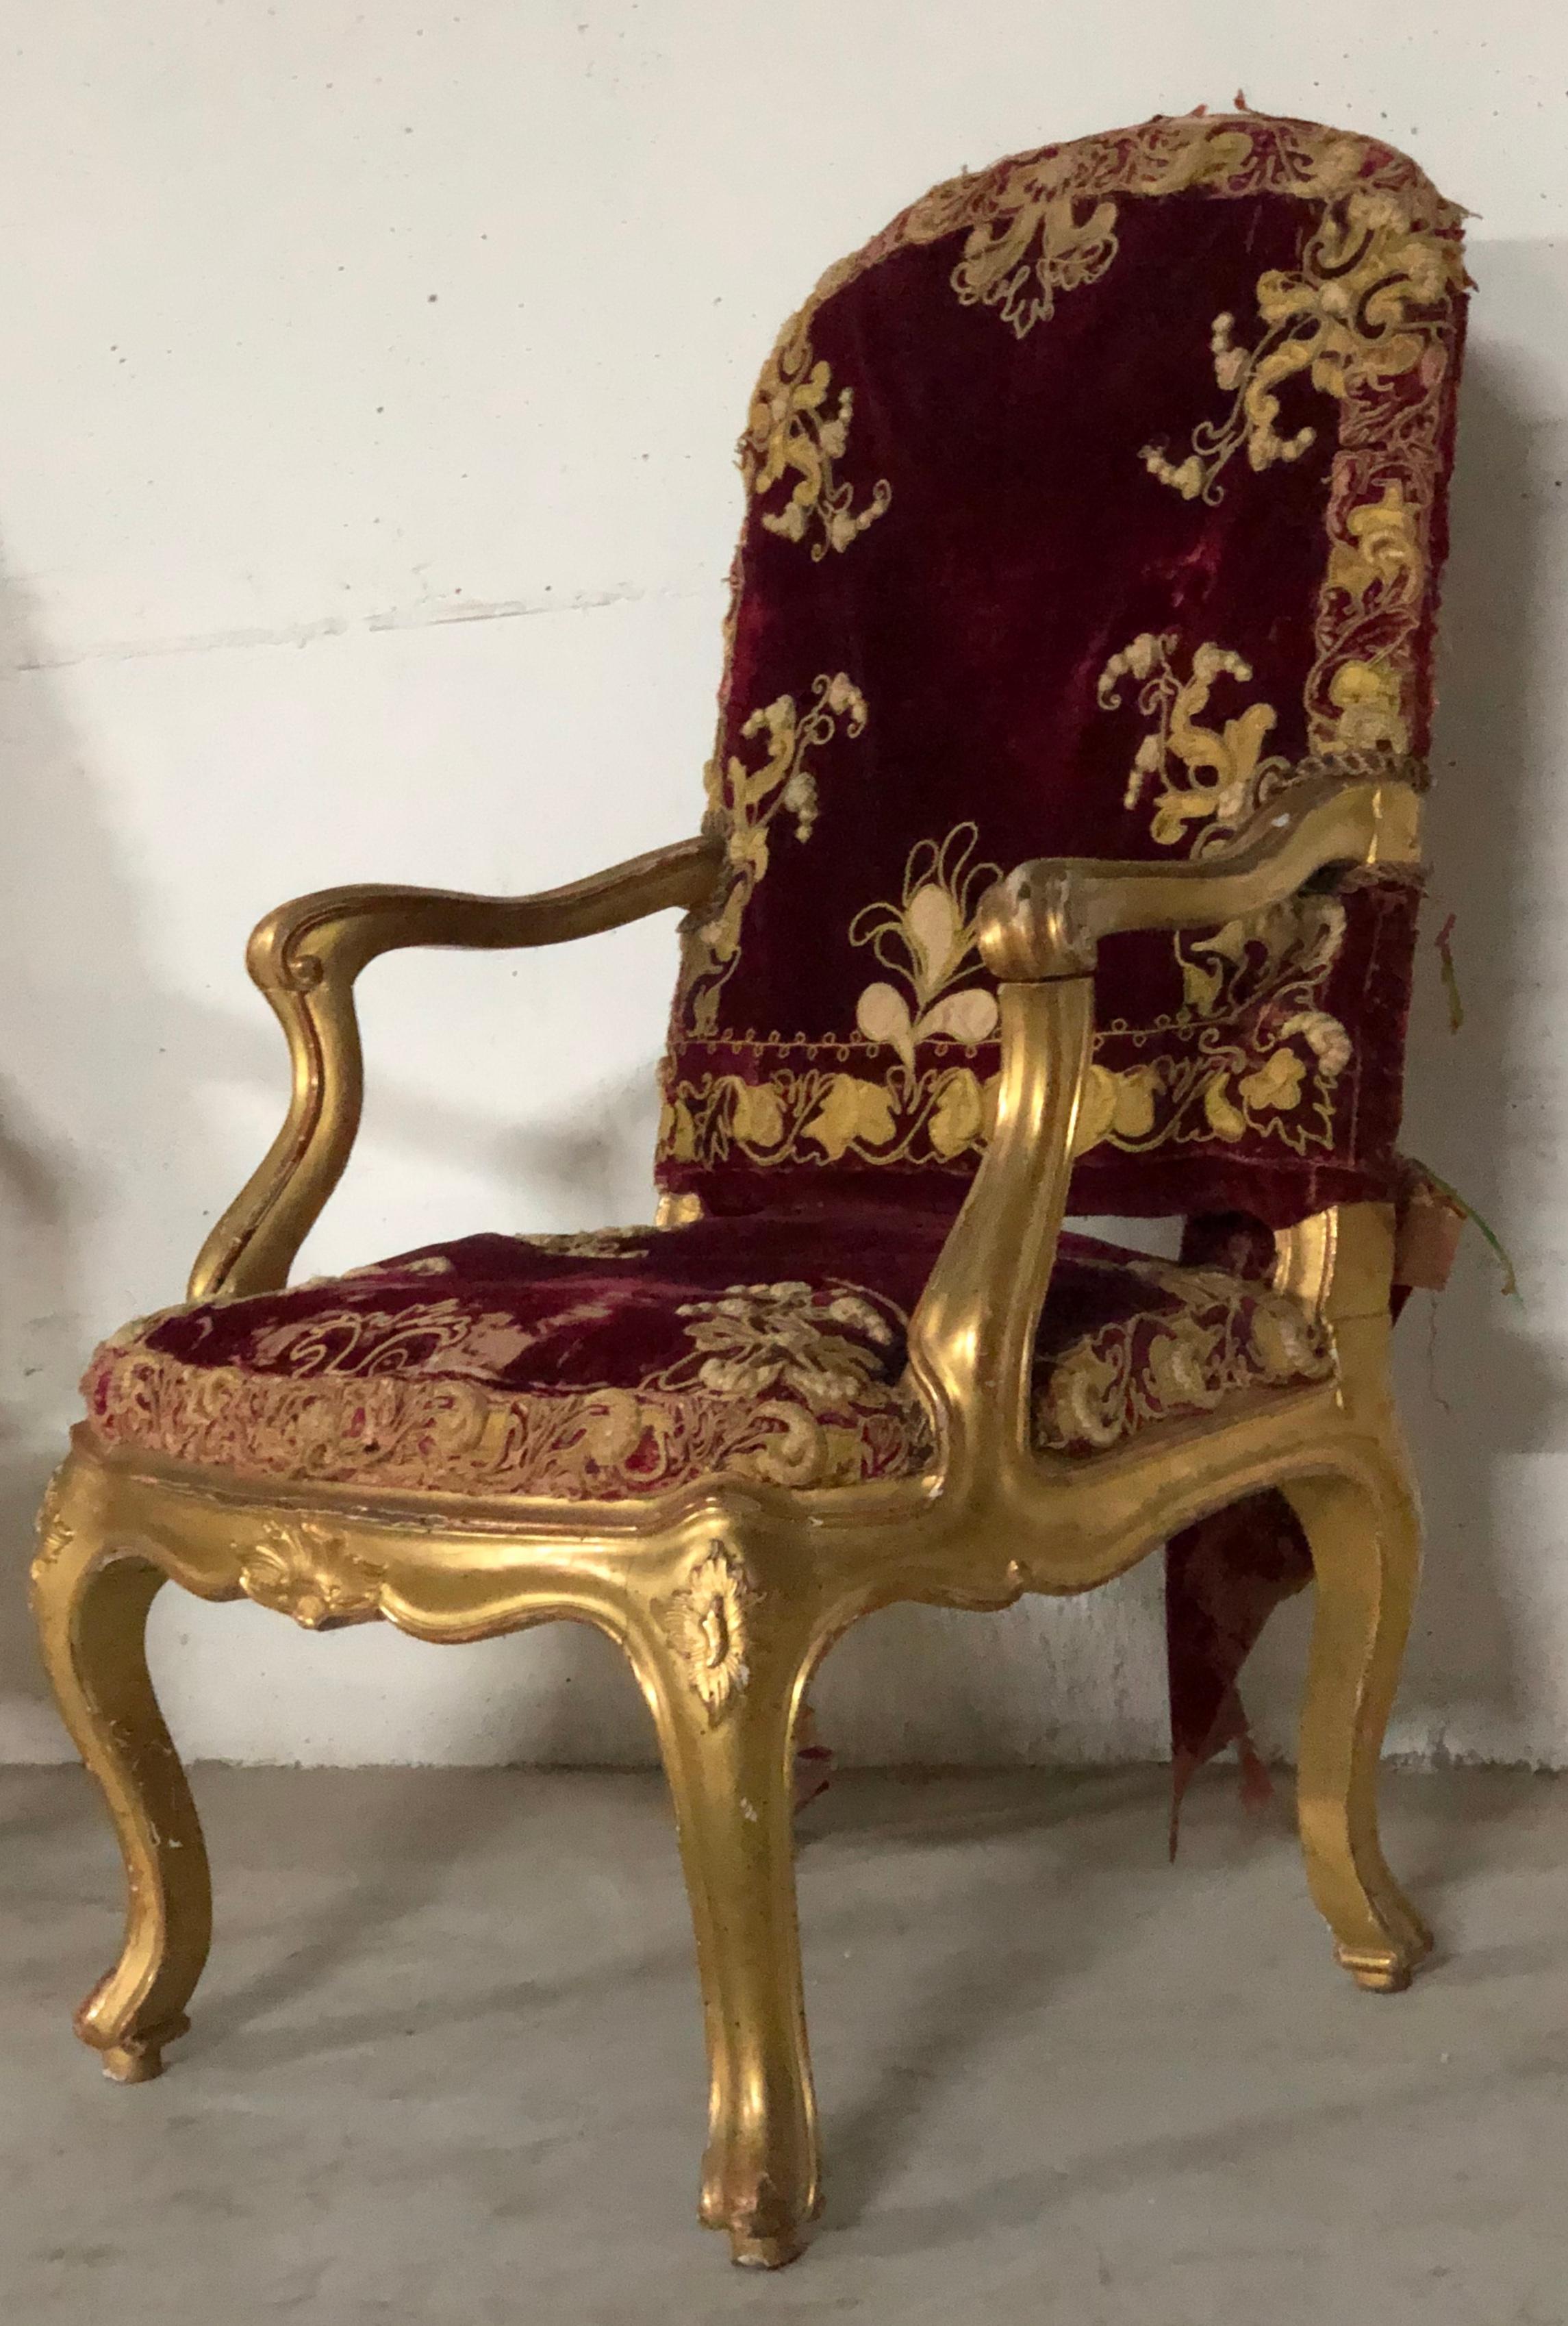 A very impressive pair of original and beautiful pair of Louis XV wooden gilt armchair. The fabric is original of the period with some small signs of age.